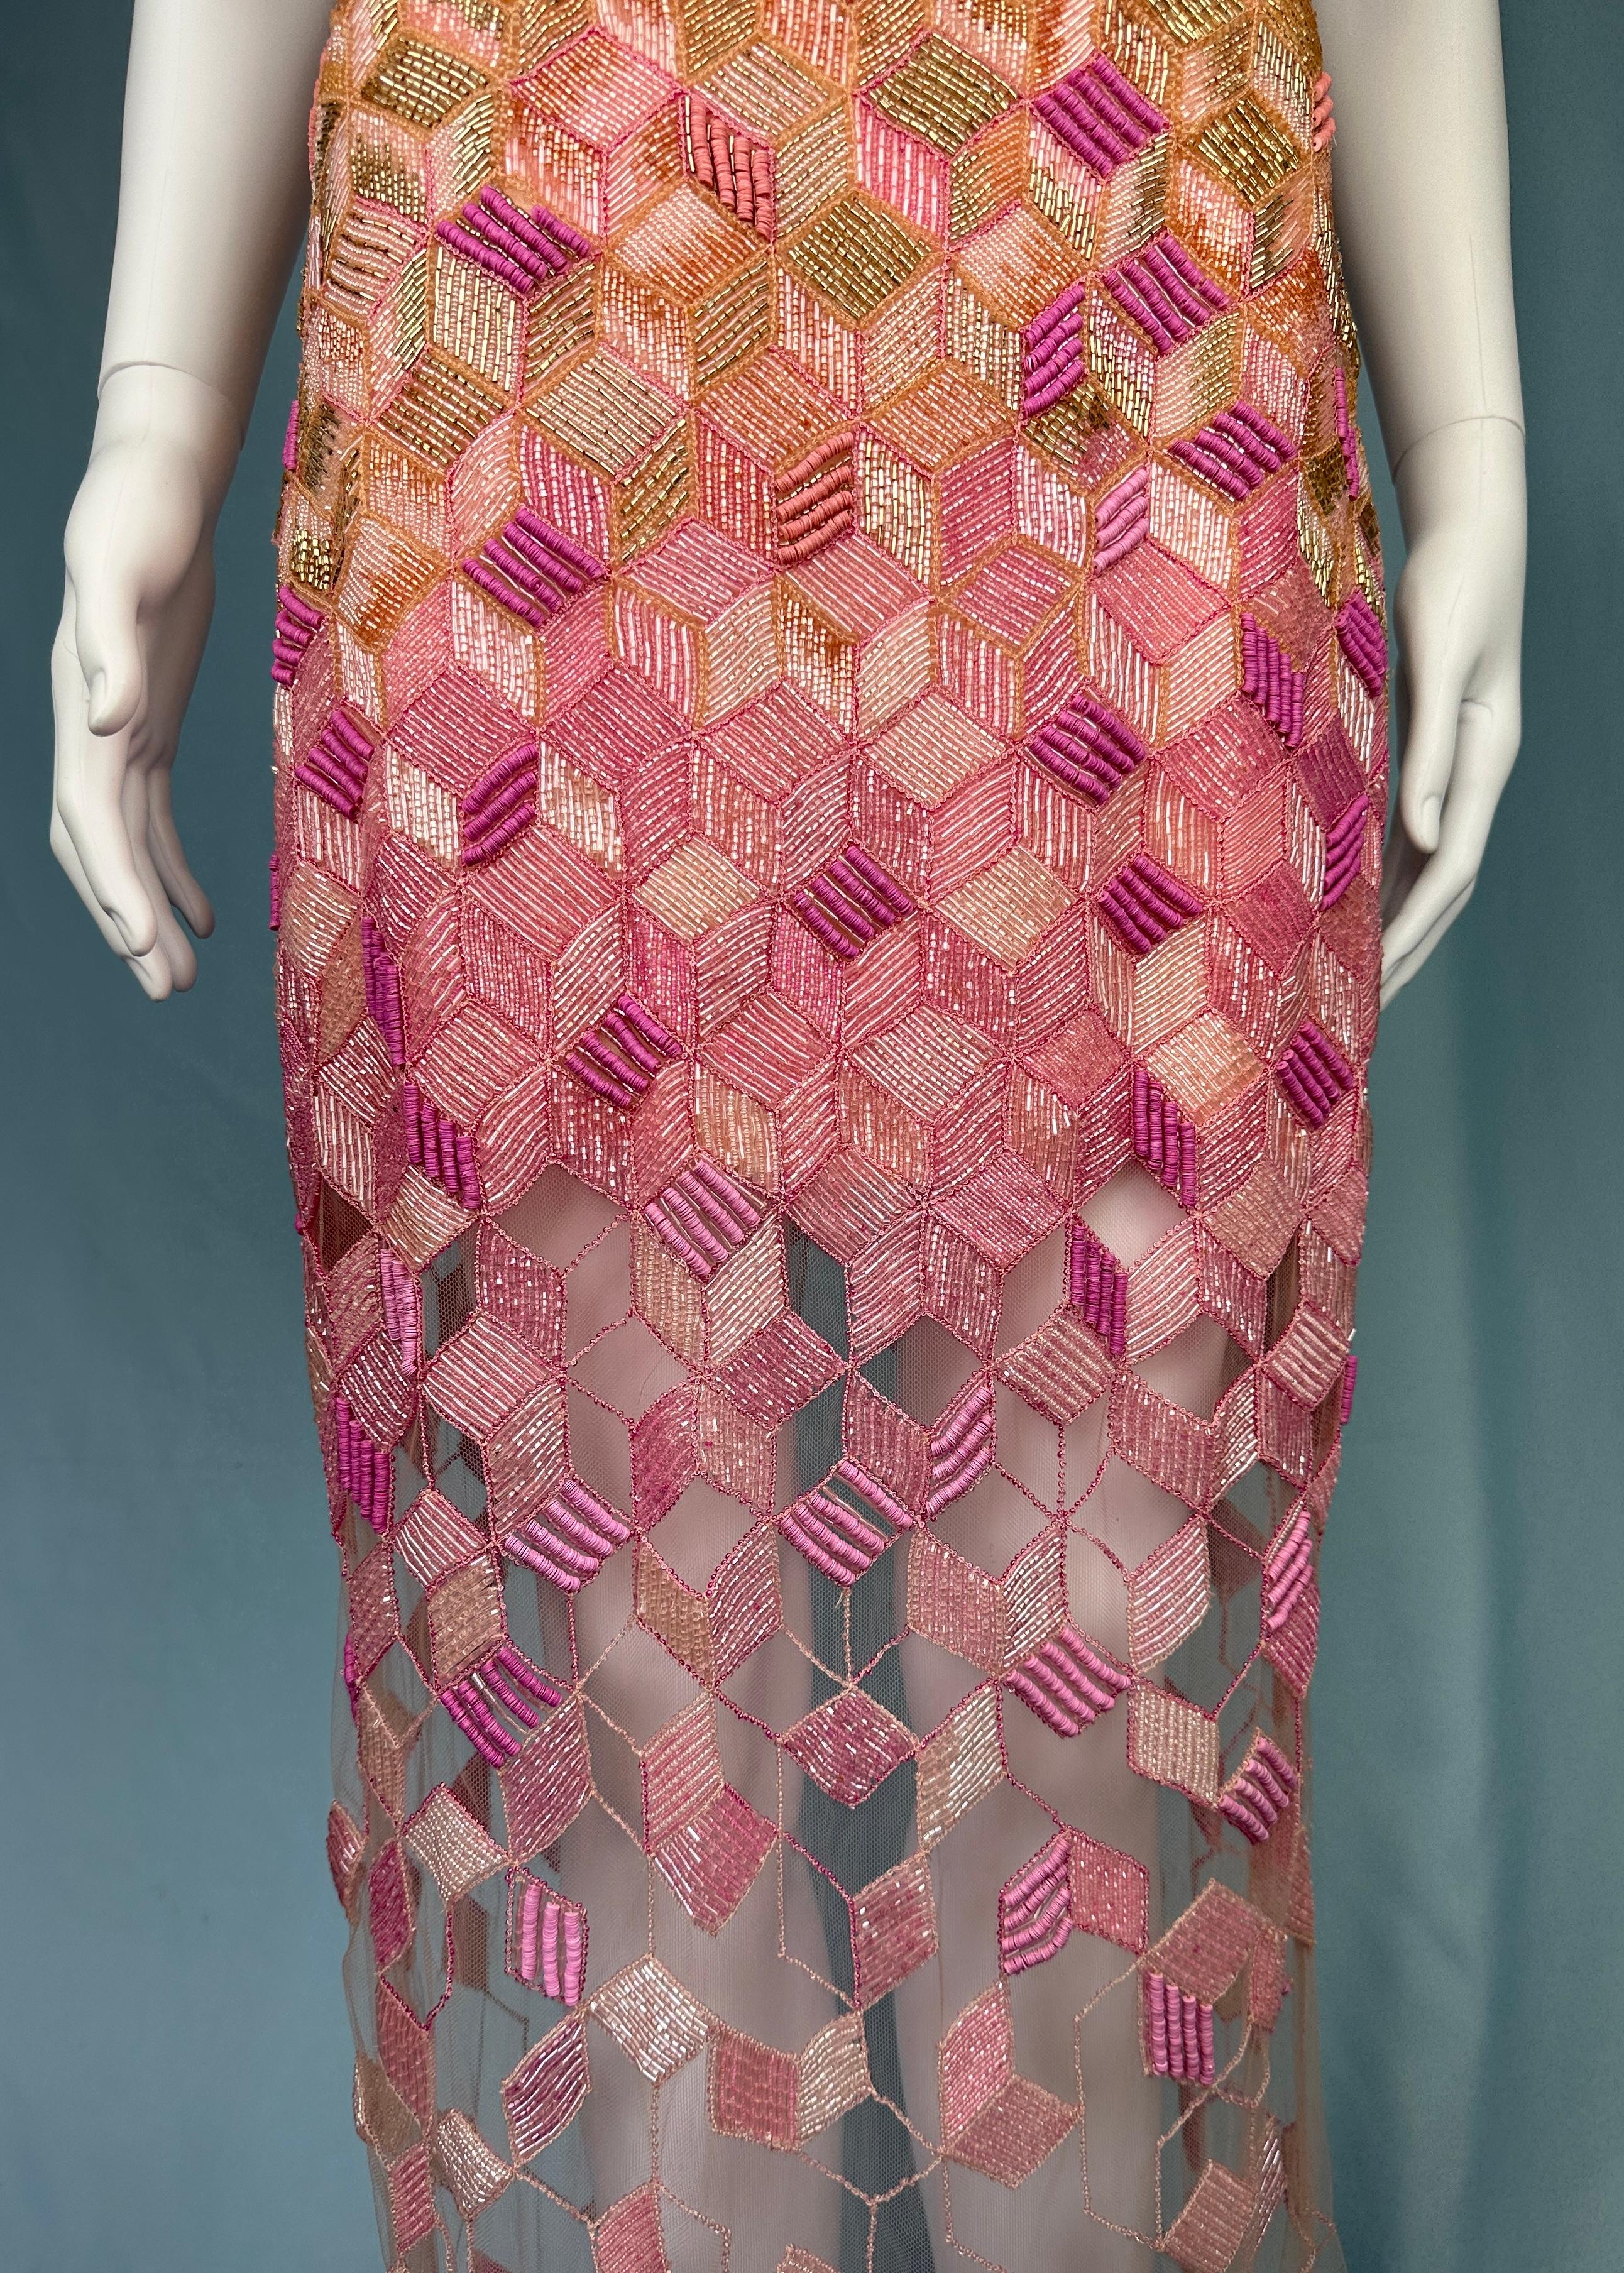 Versace Spring 2015 Beaded Embellished Geometric Pink Gown Dress For Sale 1